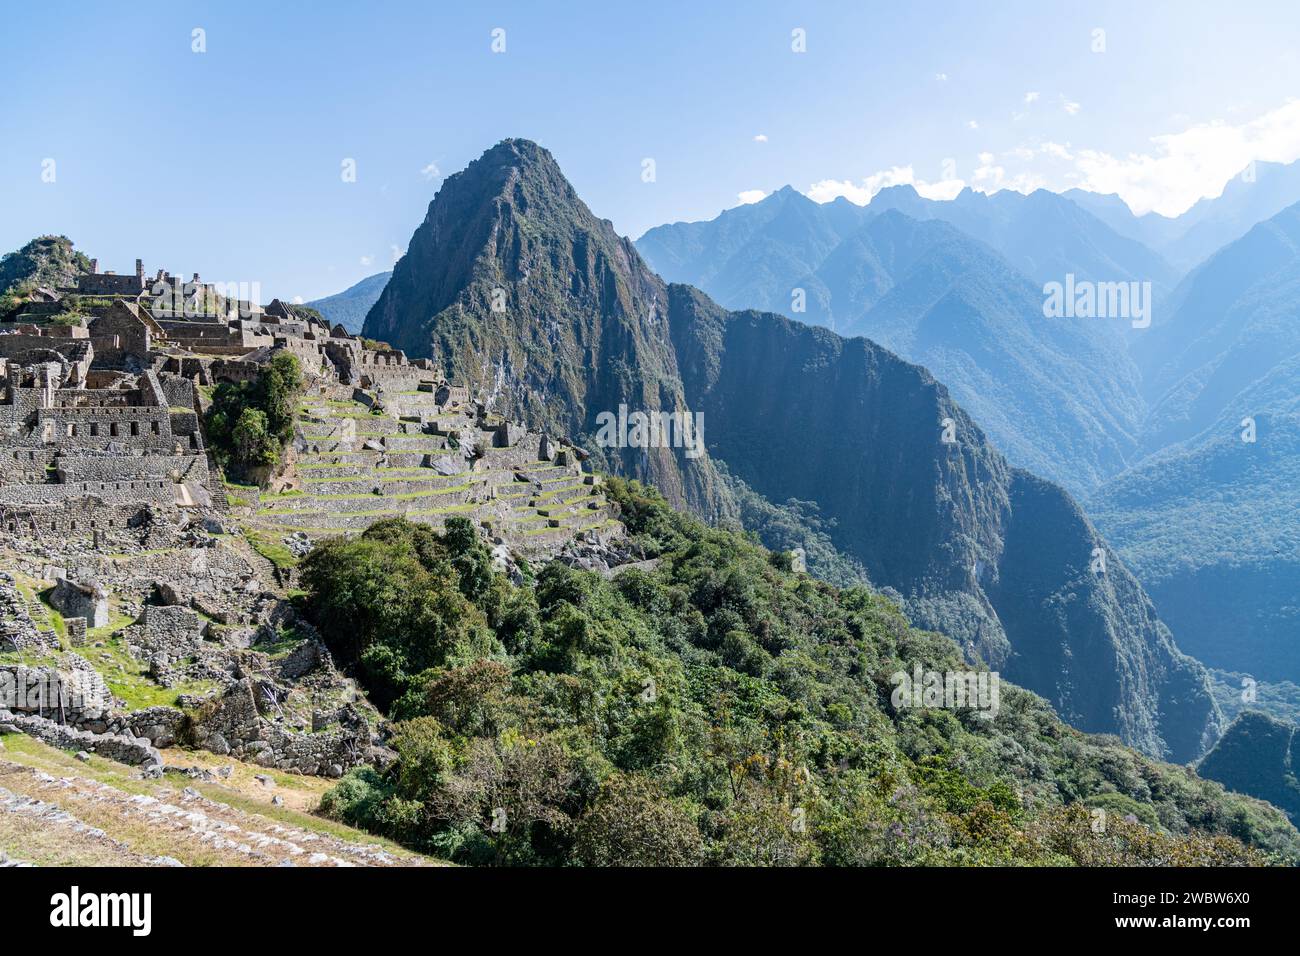 A view of the Machu Picchu citadel ruins and Huayna Picchu mountain in the Sacred Valley in Peru Stock Photo